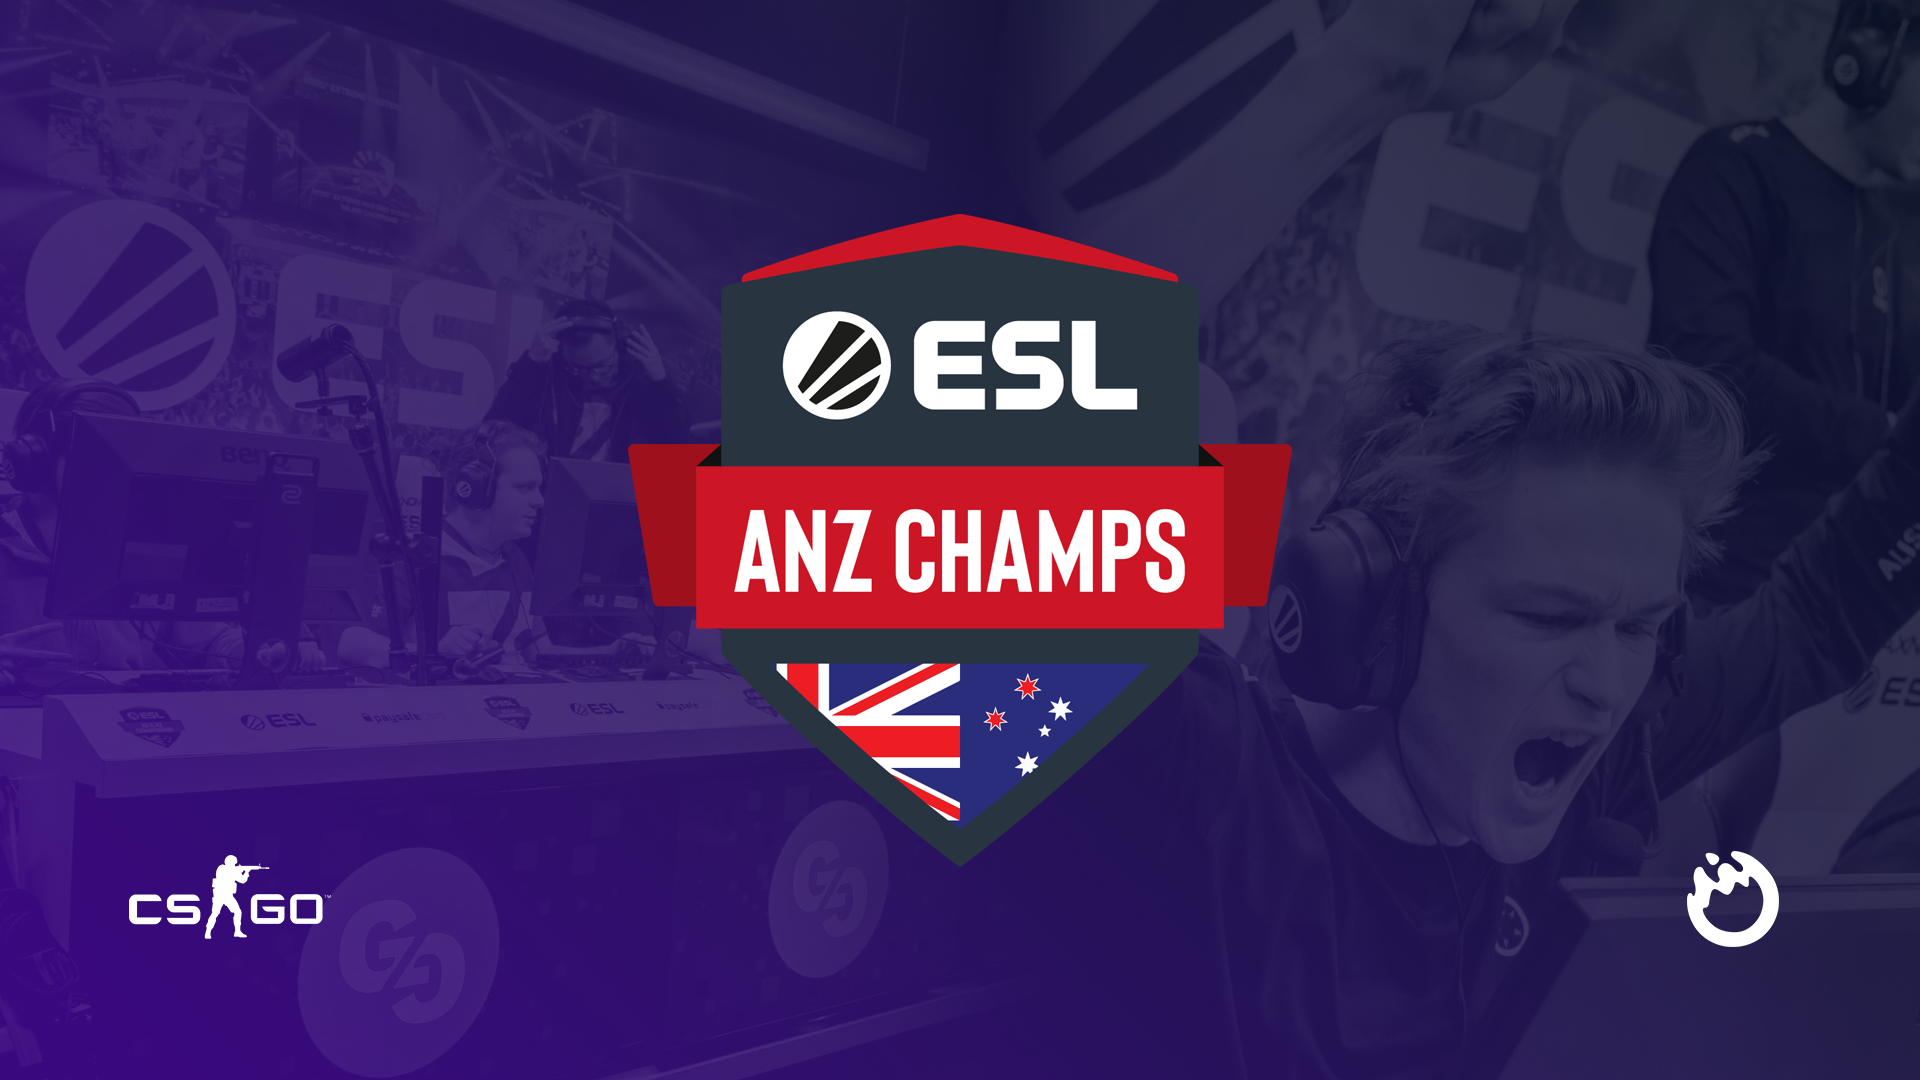 ESEA Premier & ESL ANZ Champs to merge in 2022; a new pathway to Pro League, plus community initiatives in 2022